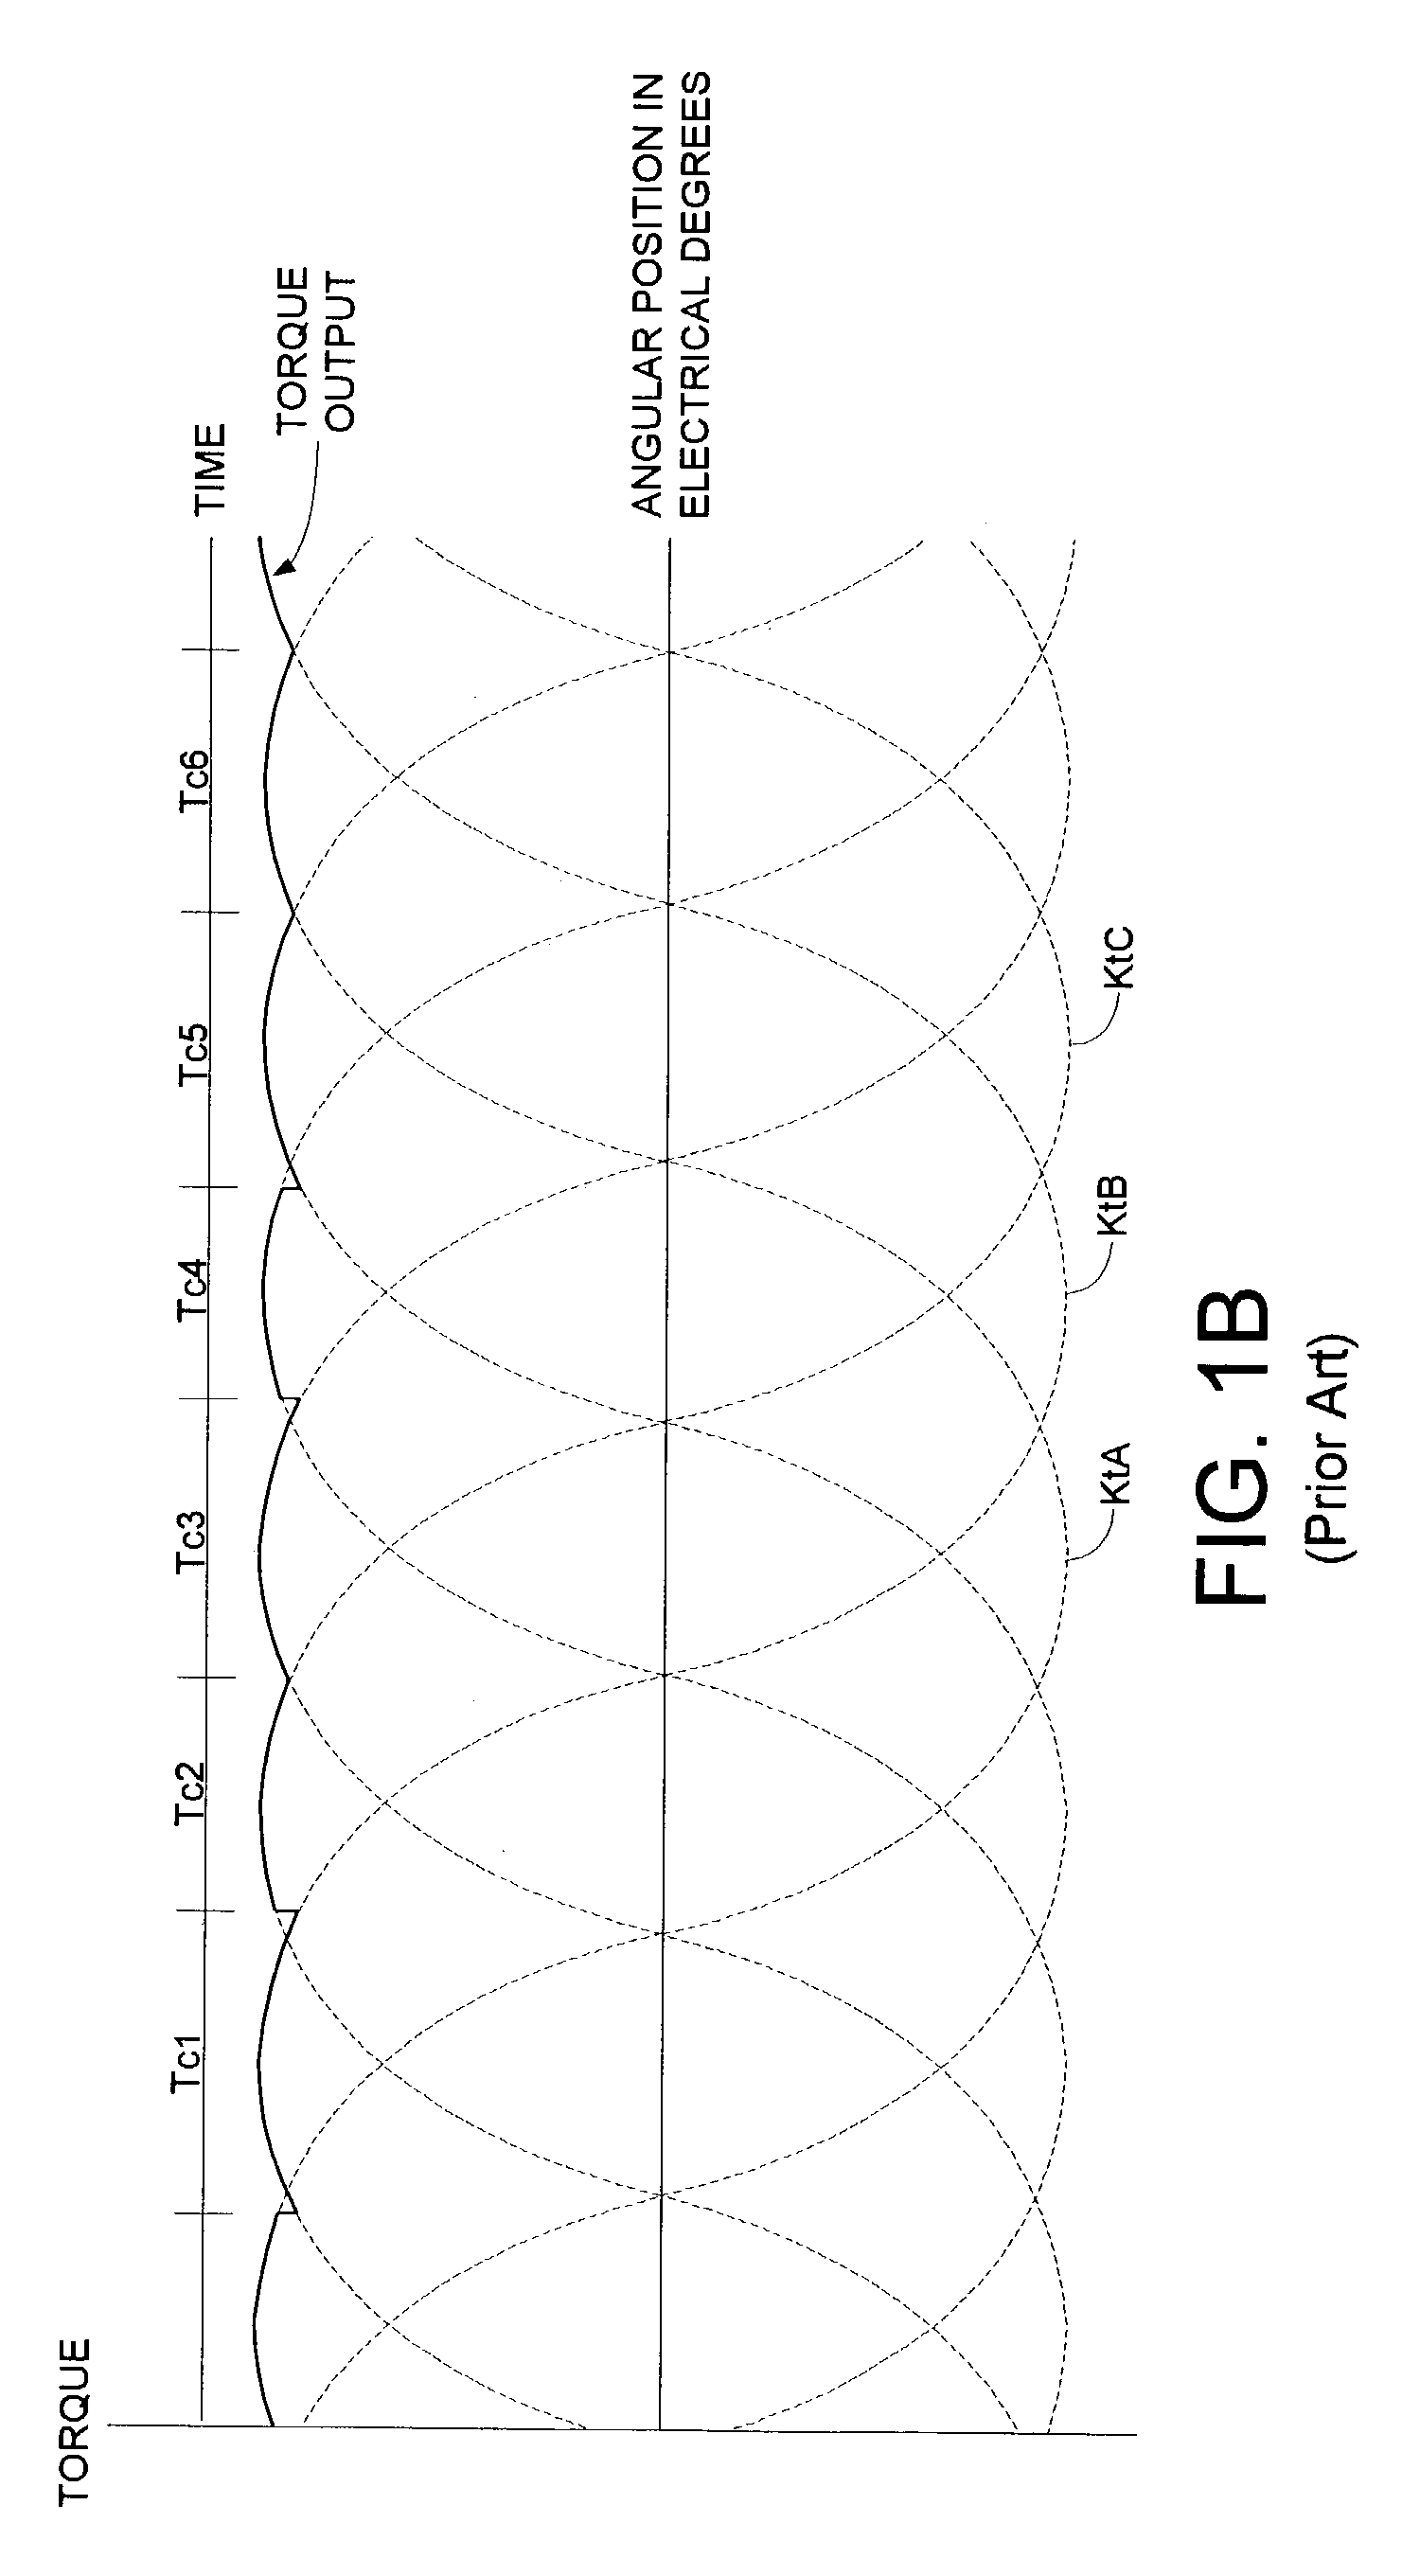 Disk drive employing commutation phase modulation and current modulation of a spindle motor